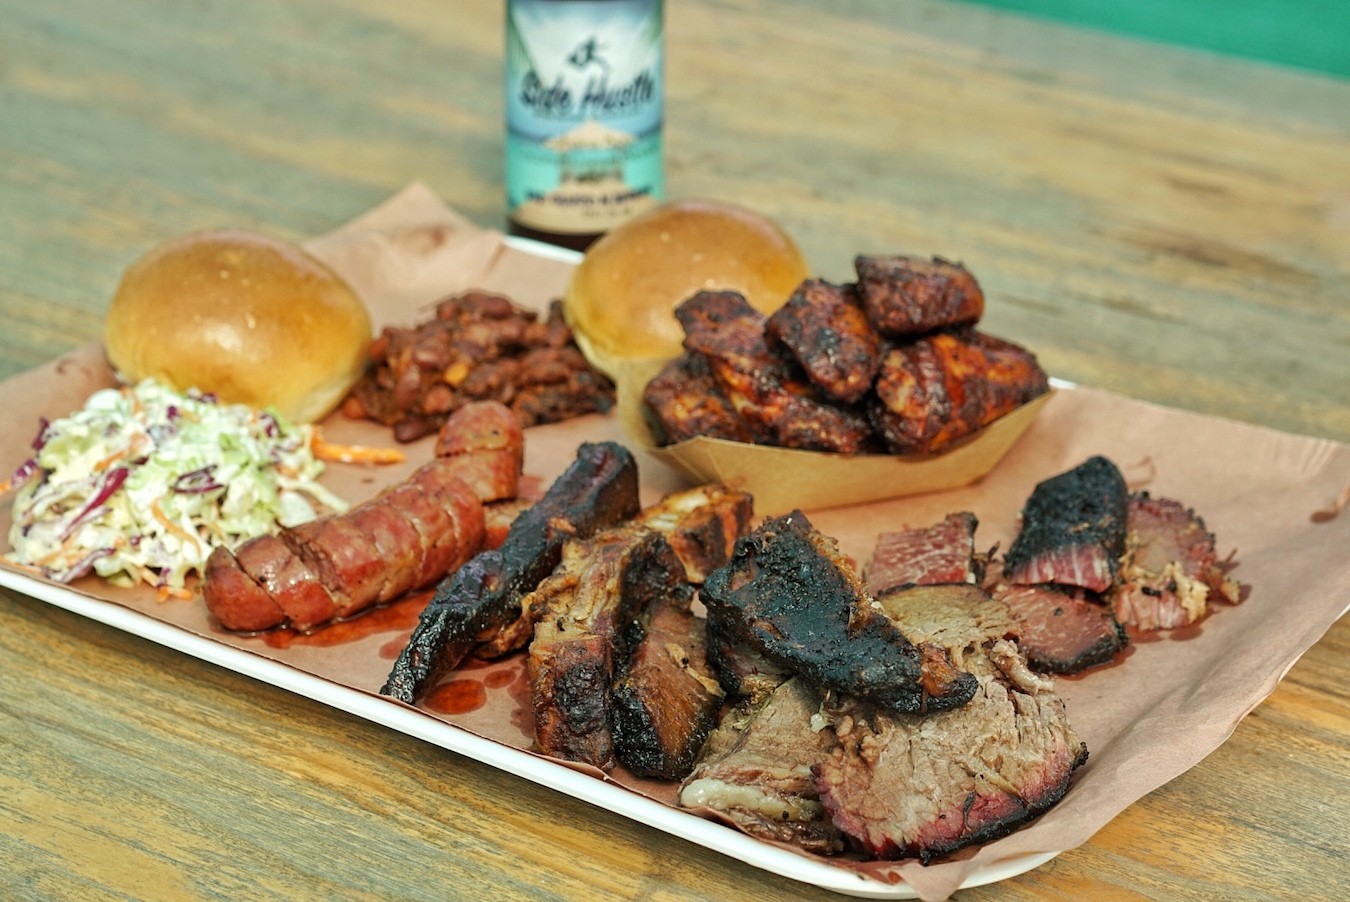 Evergreen Farm Now Offers Texas-style BBQ, Beer & Family Fun